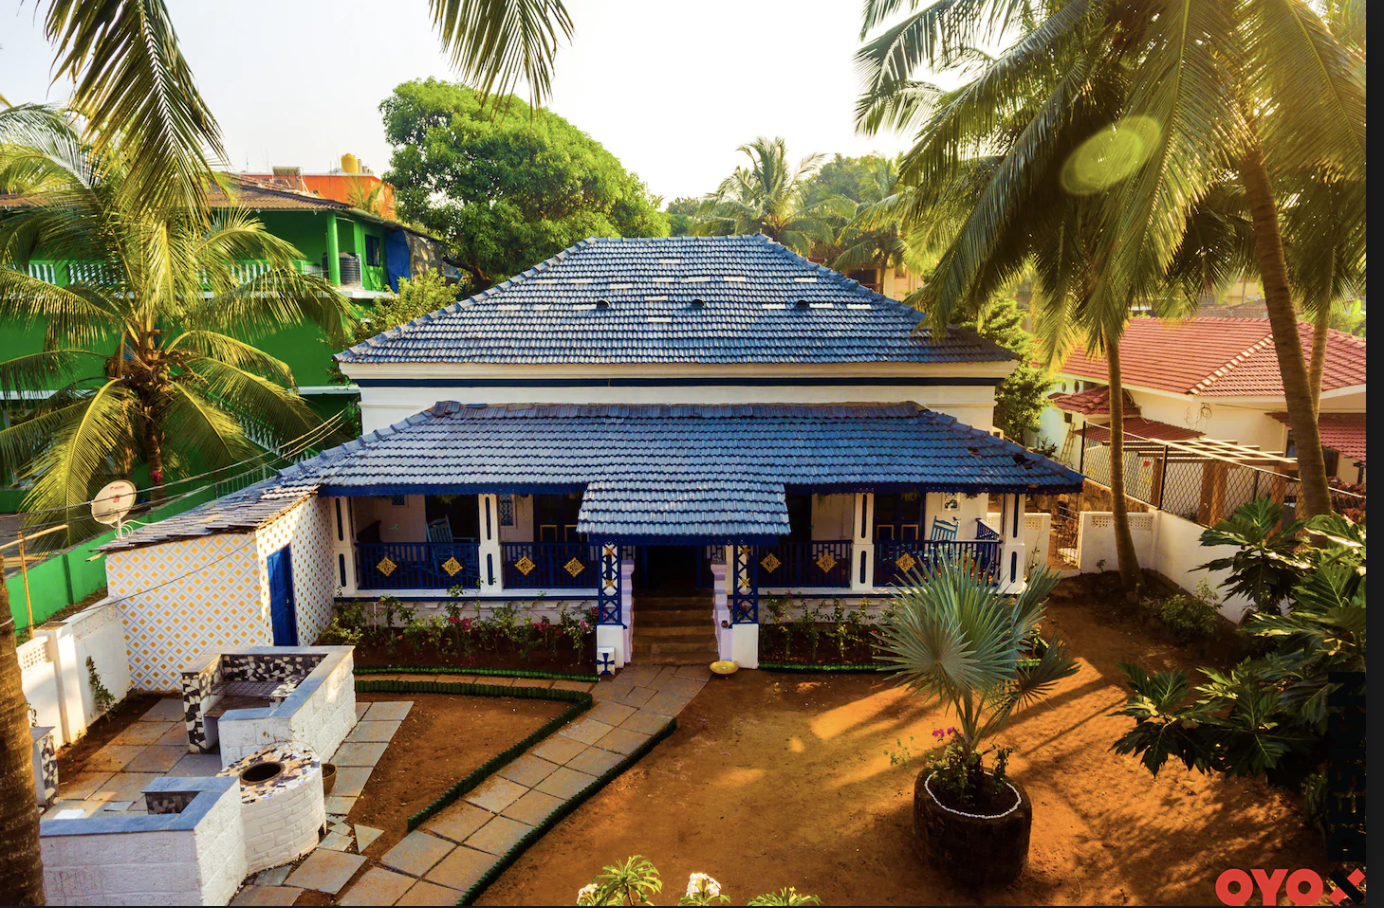 Cover Image of OYO Home